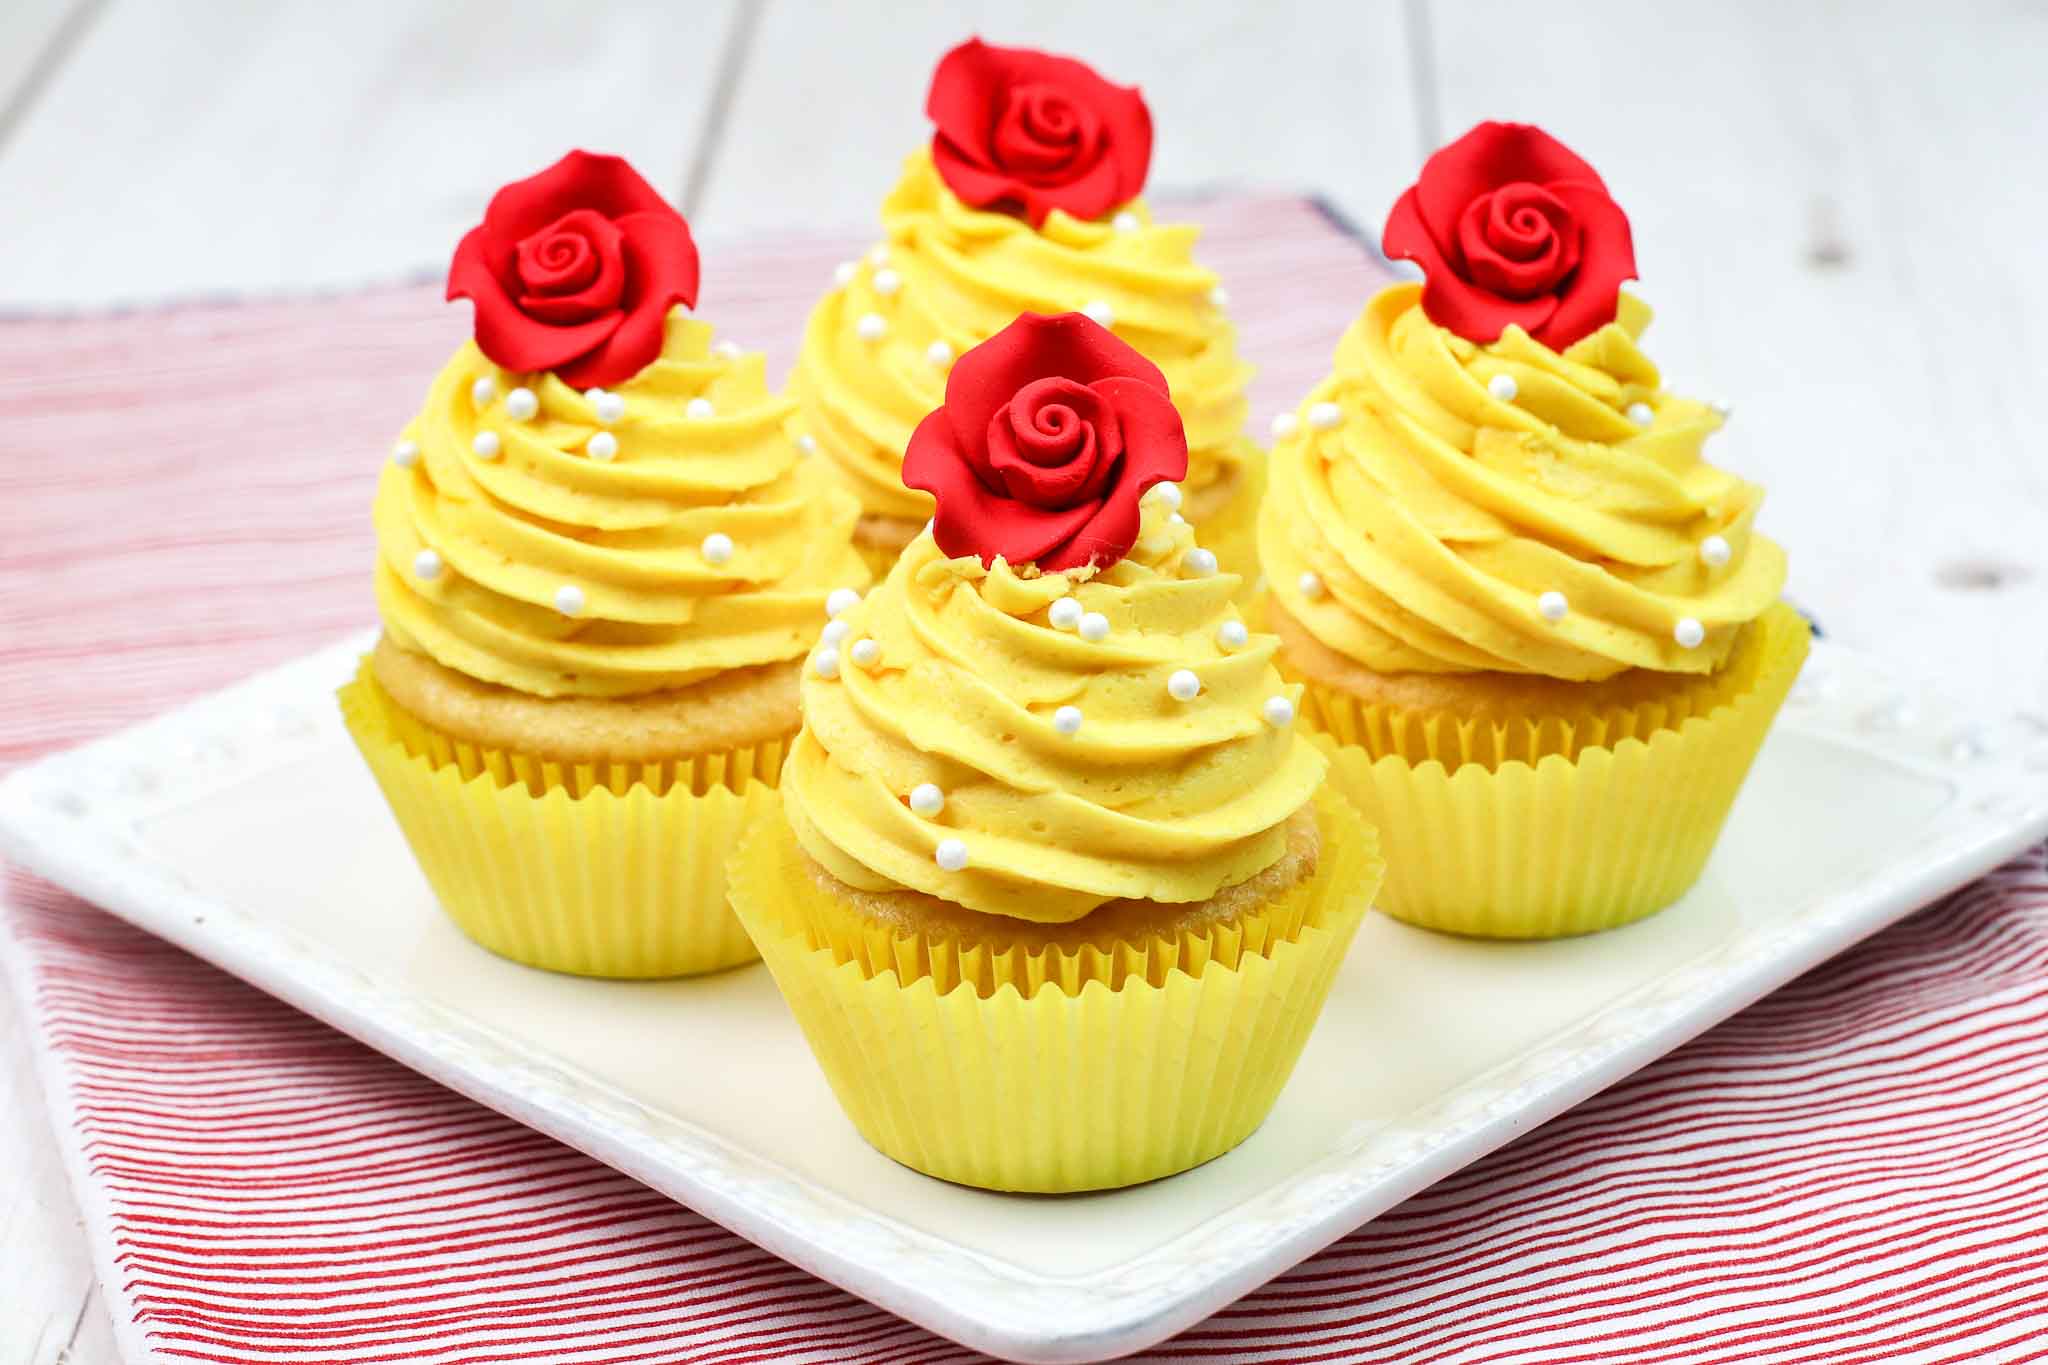 Honey Cinnamon Bumblebee Cupcakes with Cream Cheese Frosting